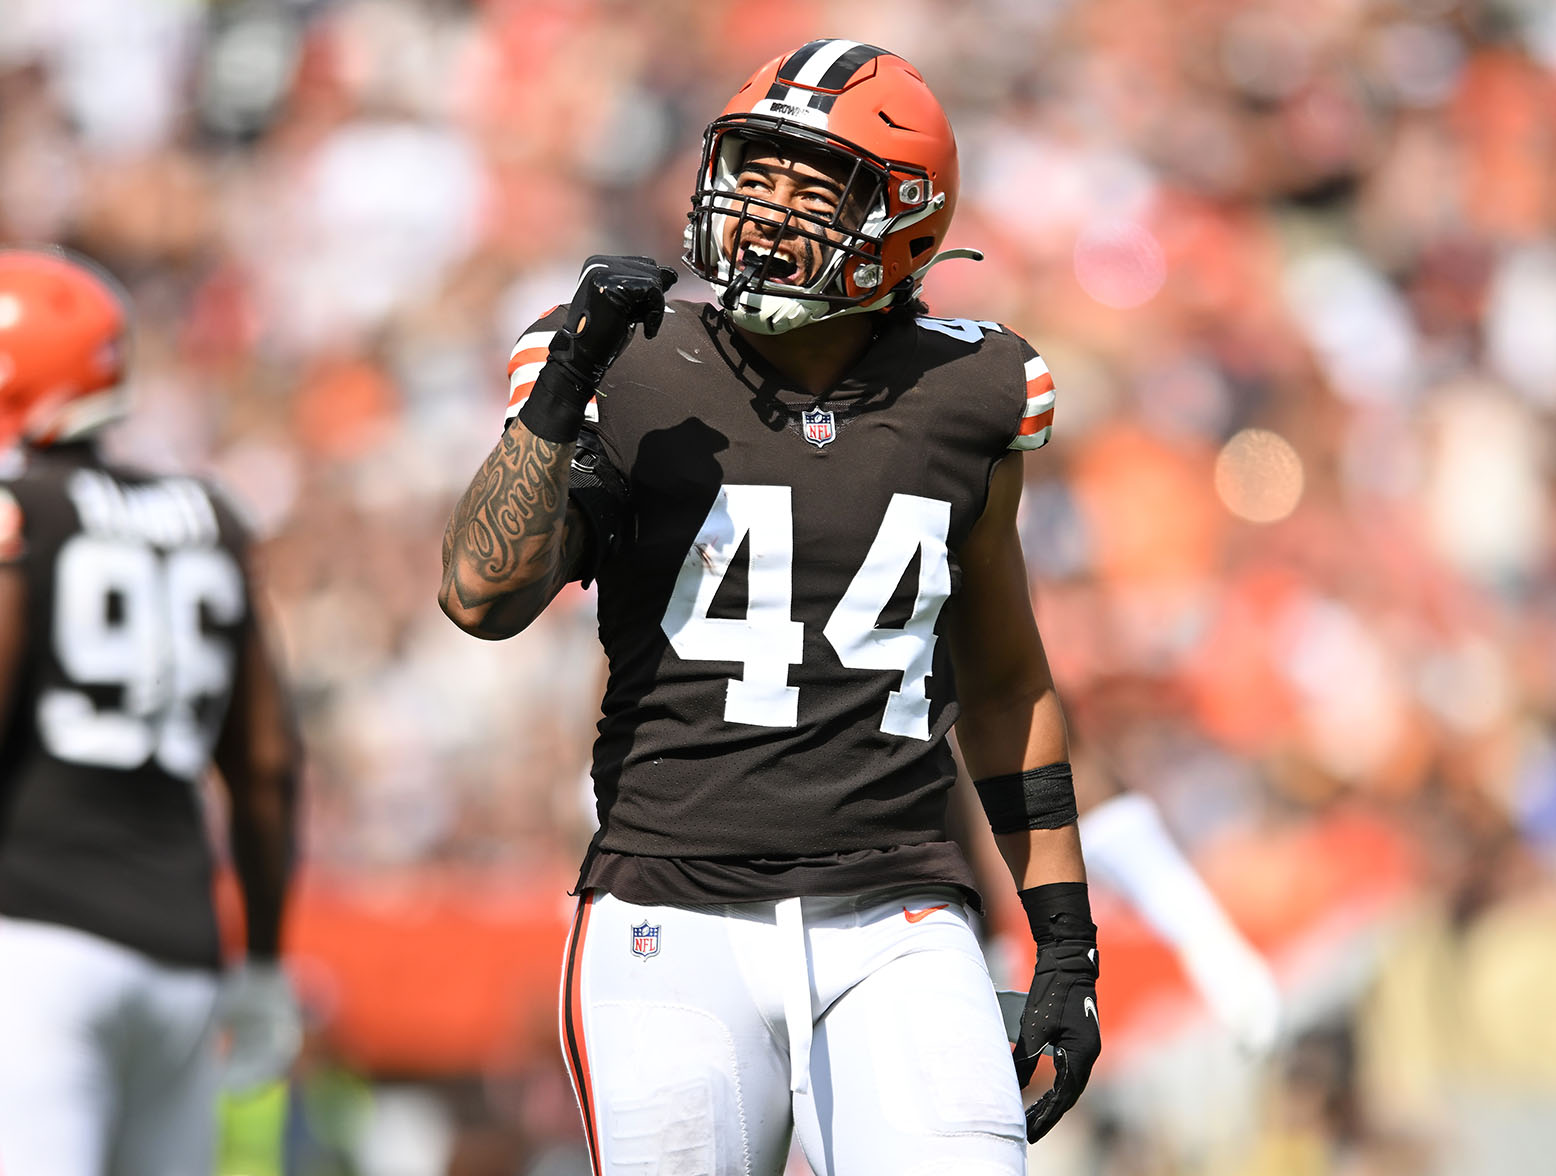 CLEVELAND, OHIO - SEPTEMBER 18: Sione Takitaki #44 of the Cleveland Browns reacts after a play against the New York Jets during the second half at FirstEnergy Stadium on September 18, 2022 in Cleveland, Ohio. (Photo by Nick Cammett/Getty Images)